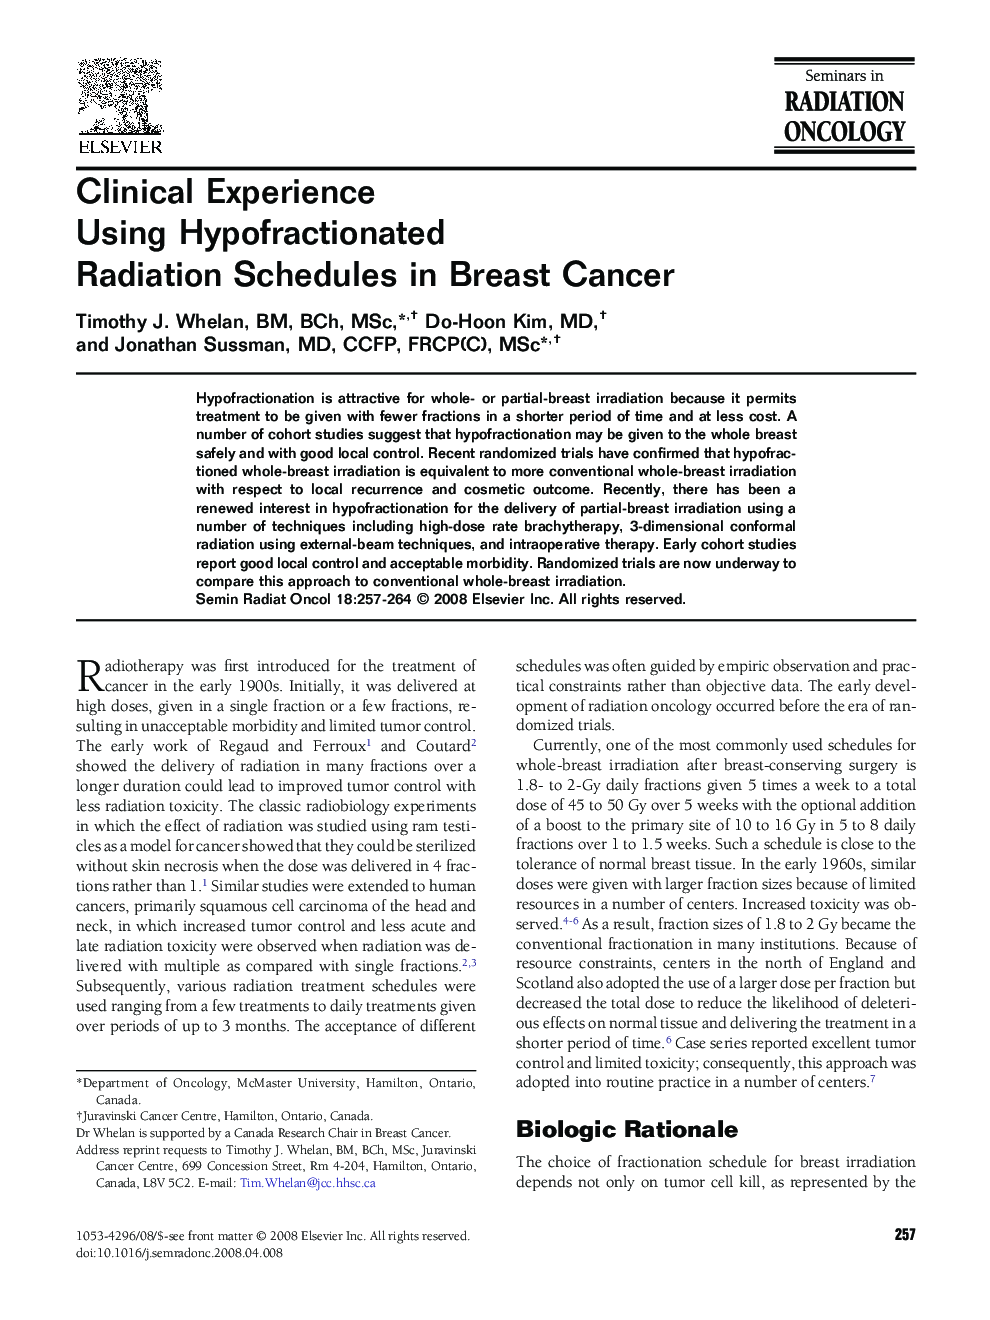 Clinical Experience Using Hypofractionated Radiation Schedules in Breast Cancer 